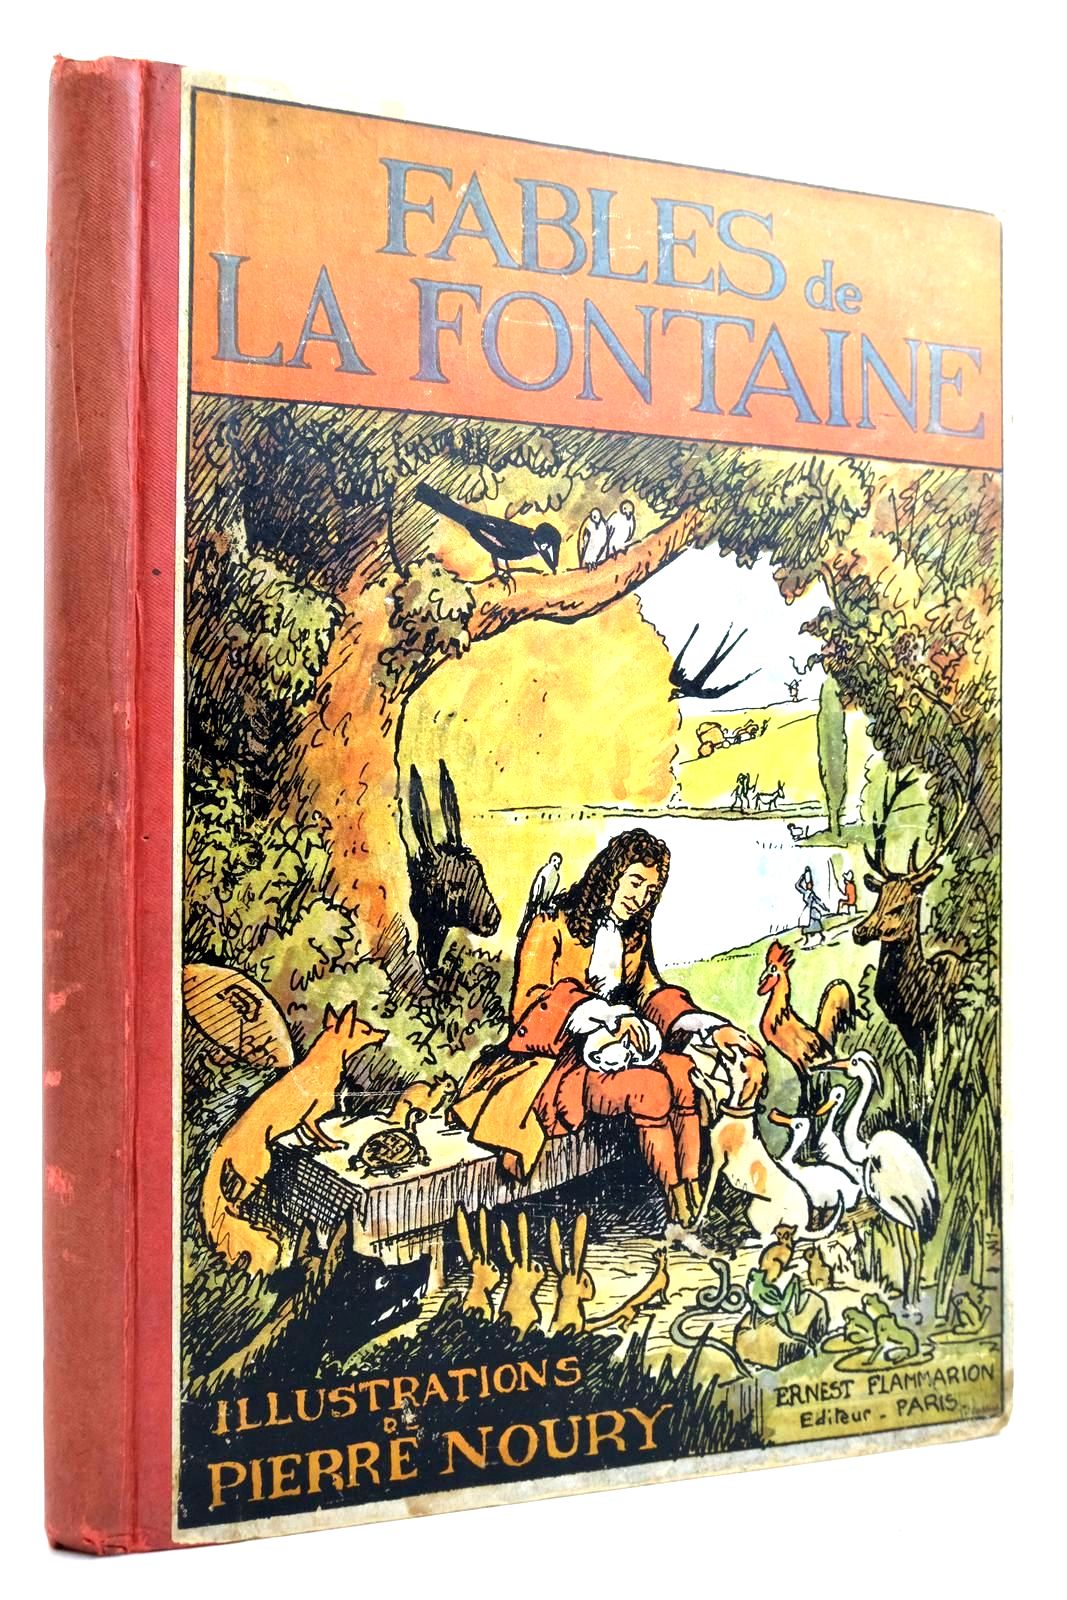 Photo of FABLES DE LA FONTAINE written by De La Fontaine, Jean illustrated by Noury, Pierre published by Ernest Flammarion (STOCK CODE: 2135787)  for sale by Stella & Rose's Books